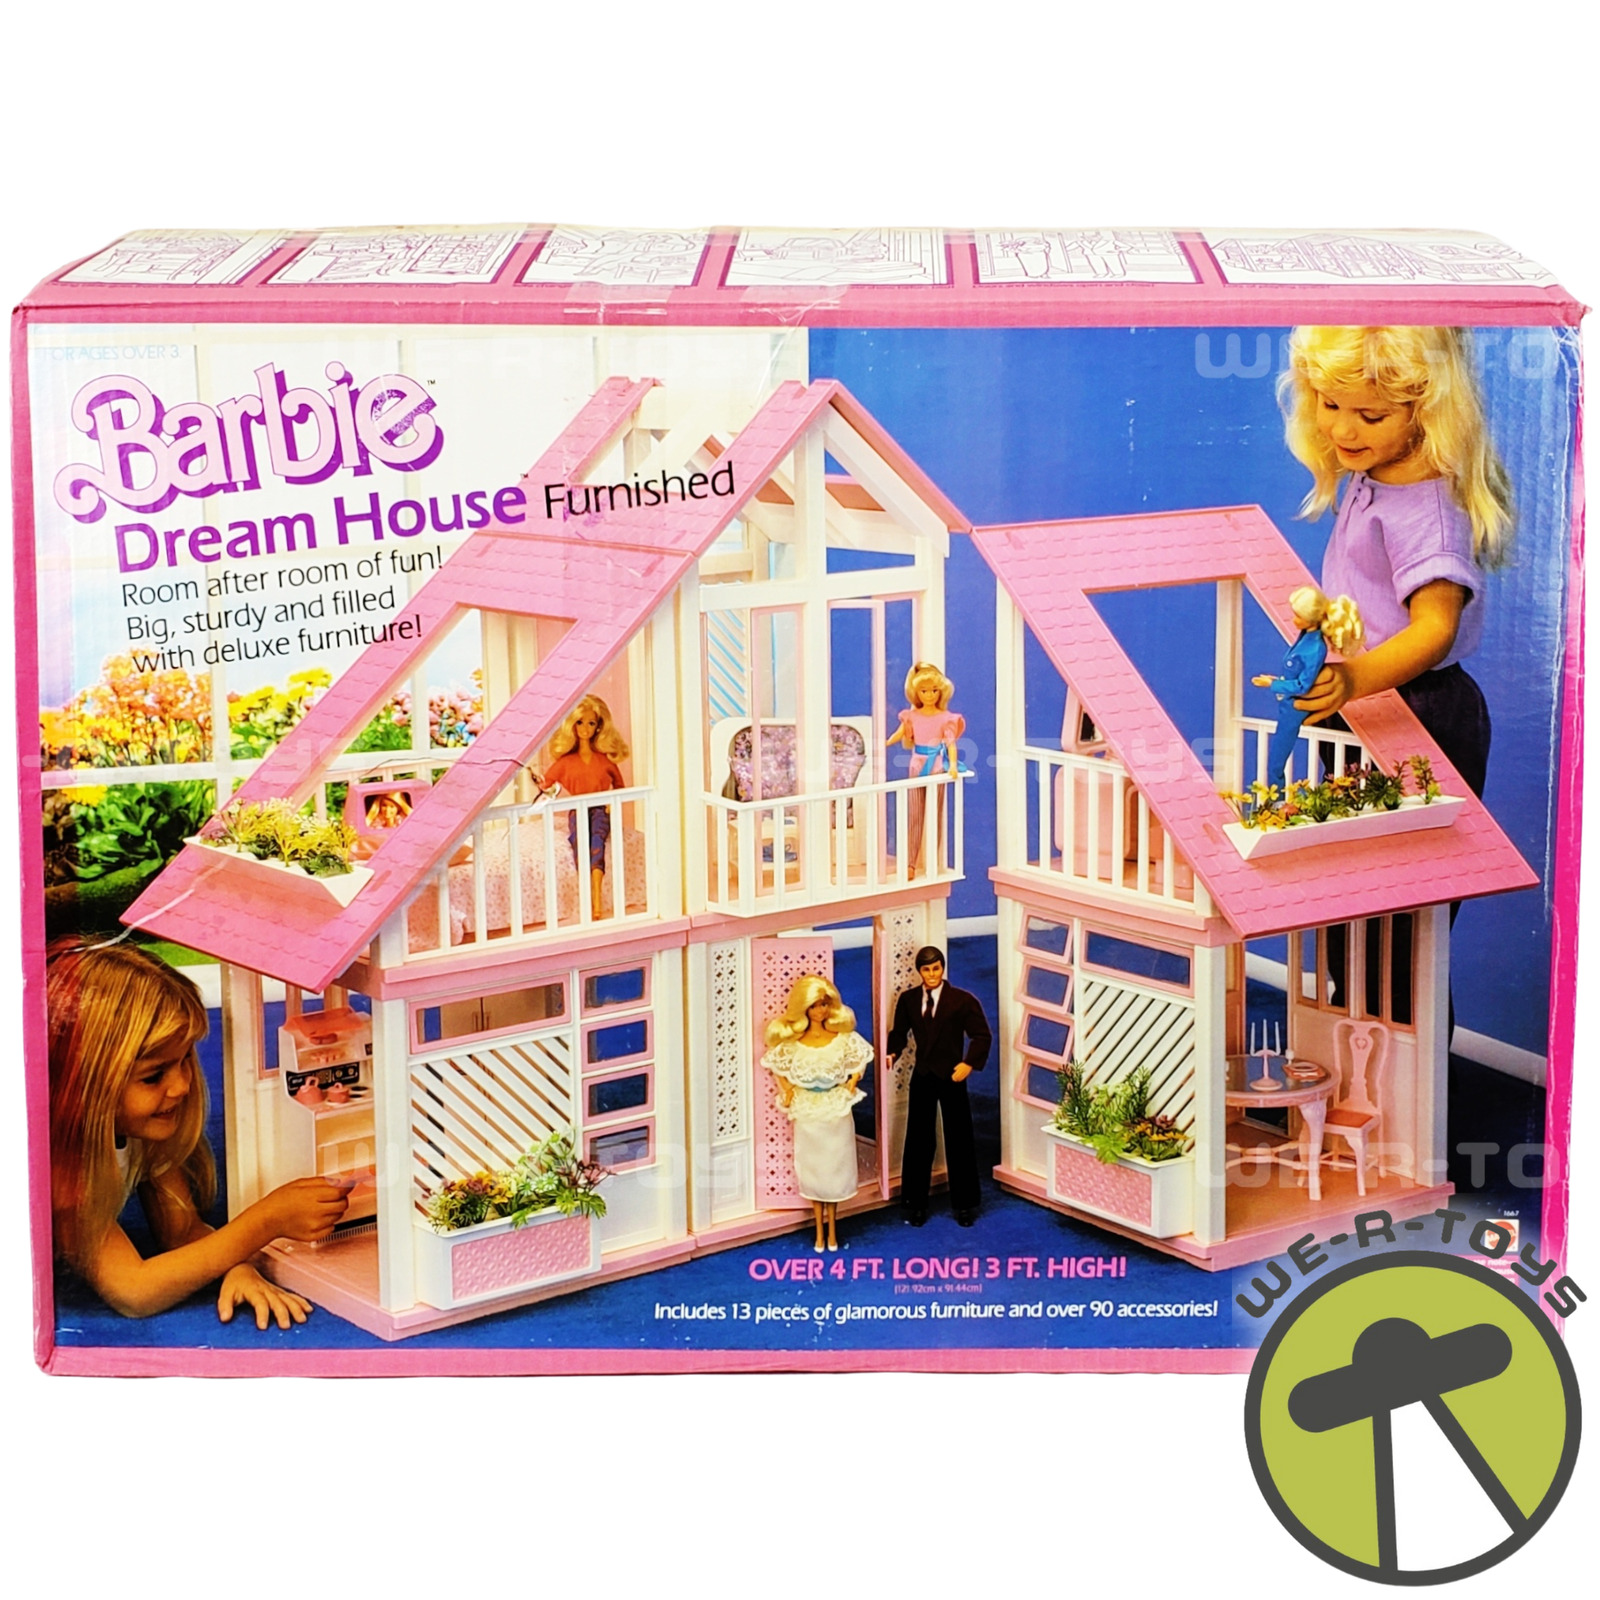 Barbie Dream House 1985 Vintage Mattel No. 1667 With Shipper Box NEW